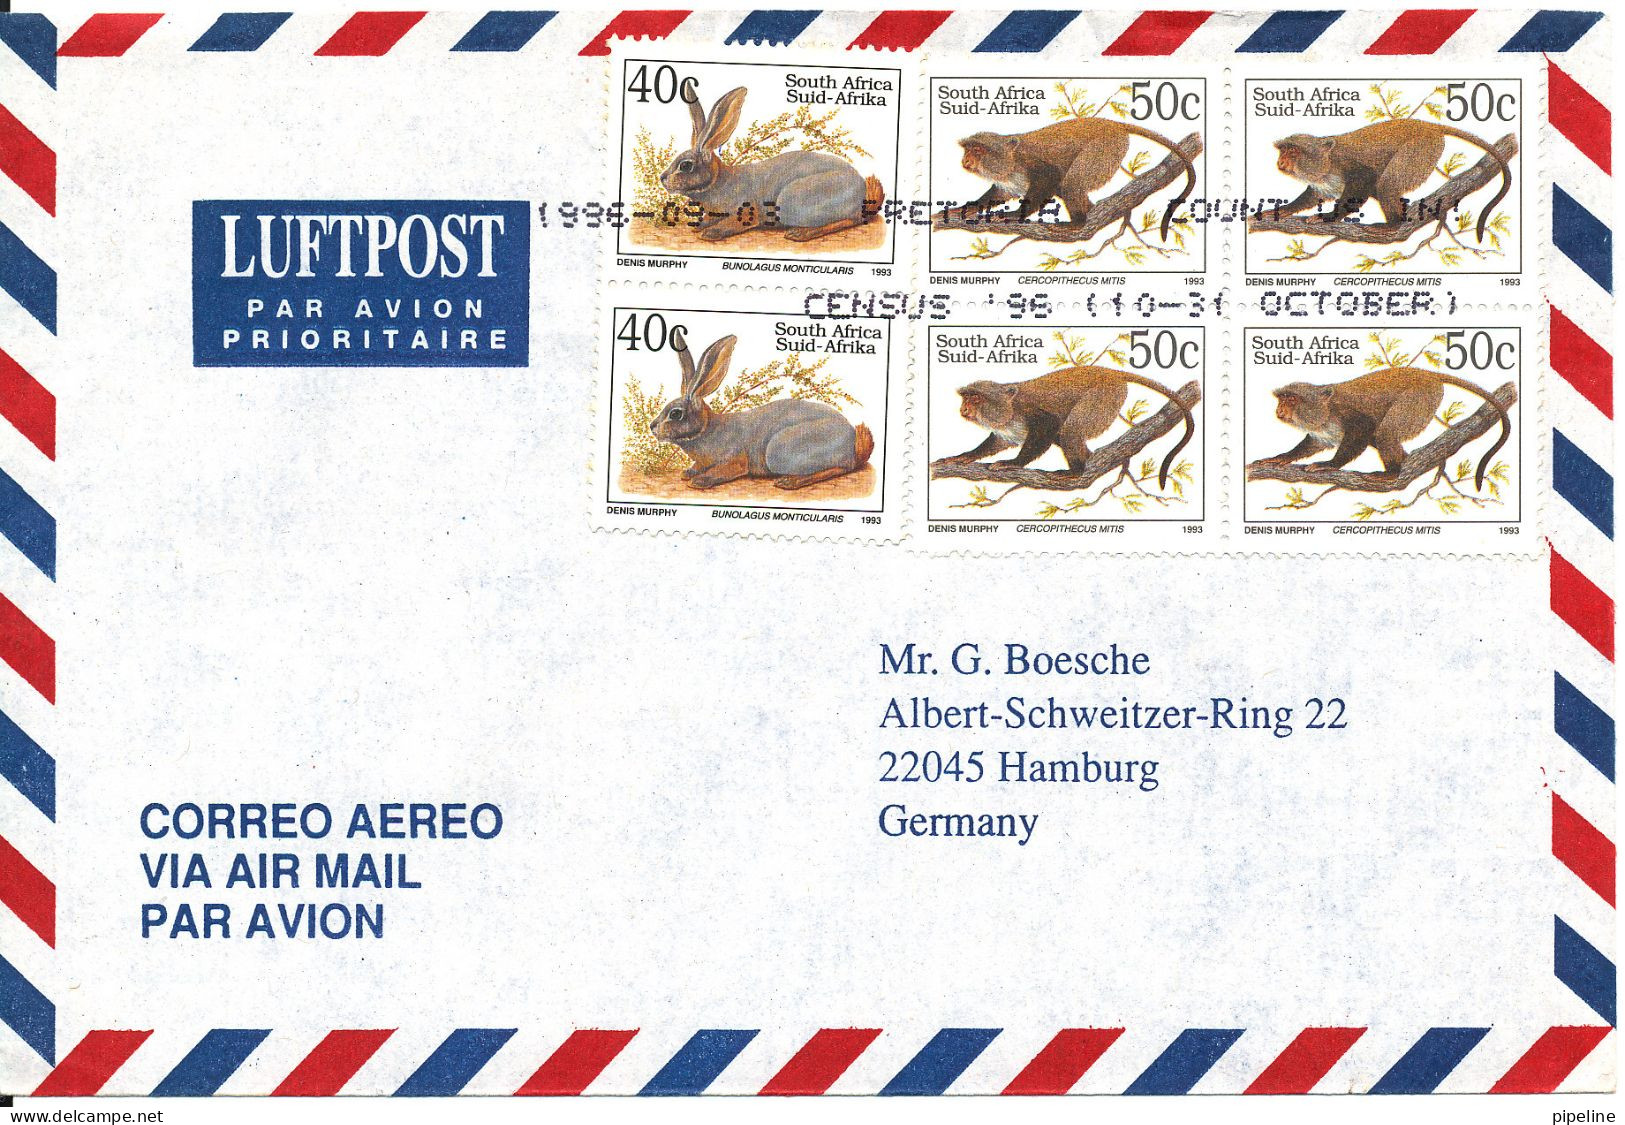 South Africa Air Mail Cover Sent To Germany 3-10-1996 - Poste Aérienne